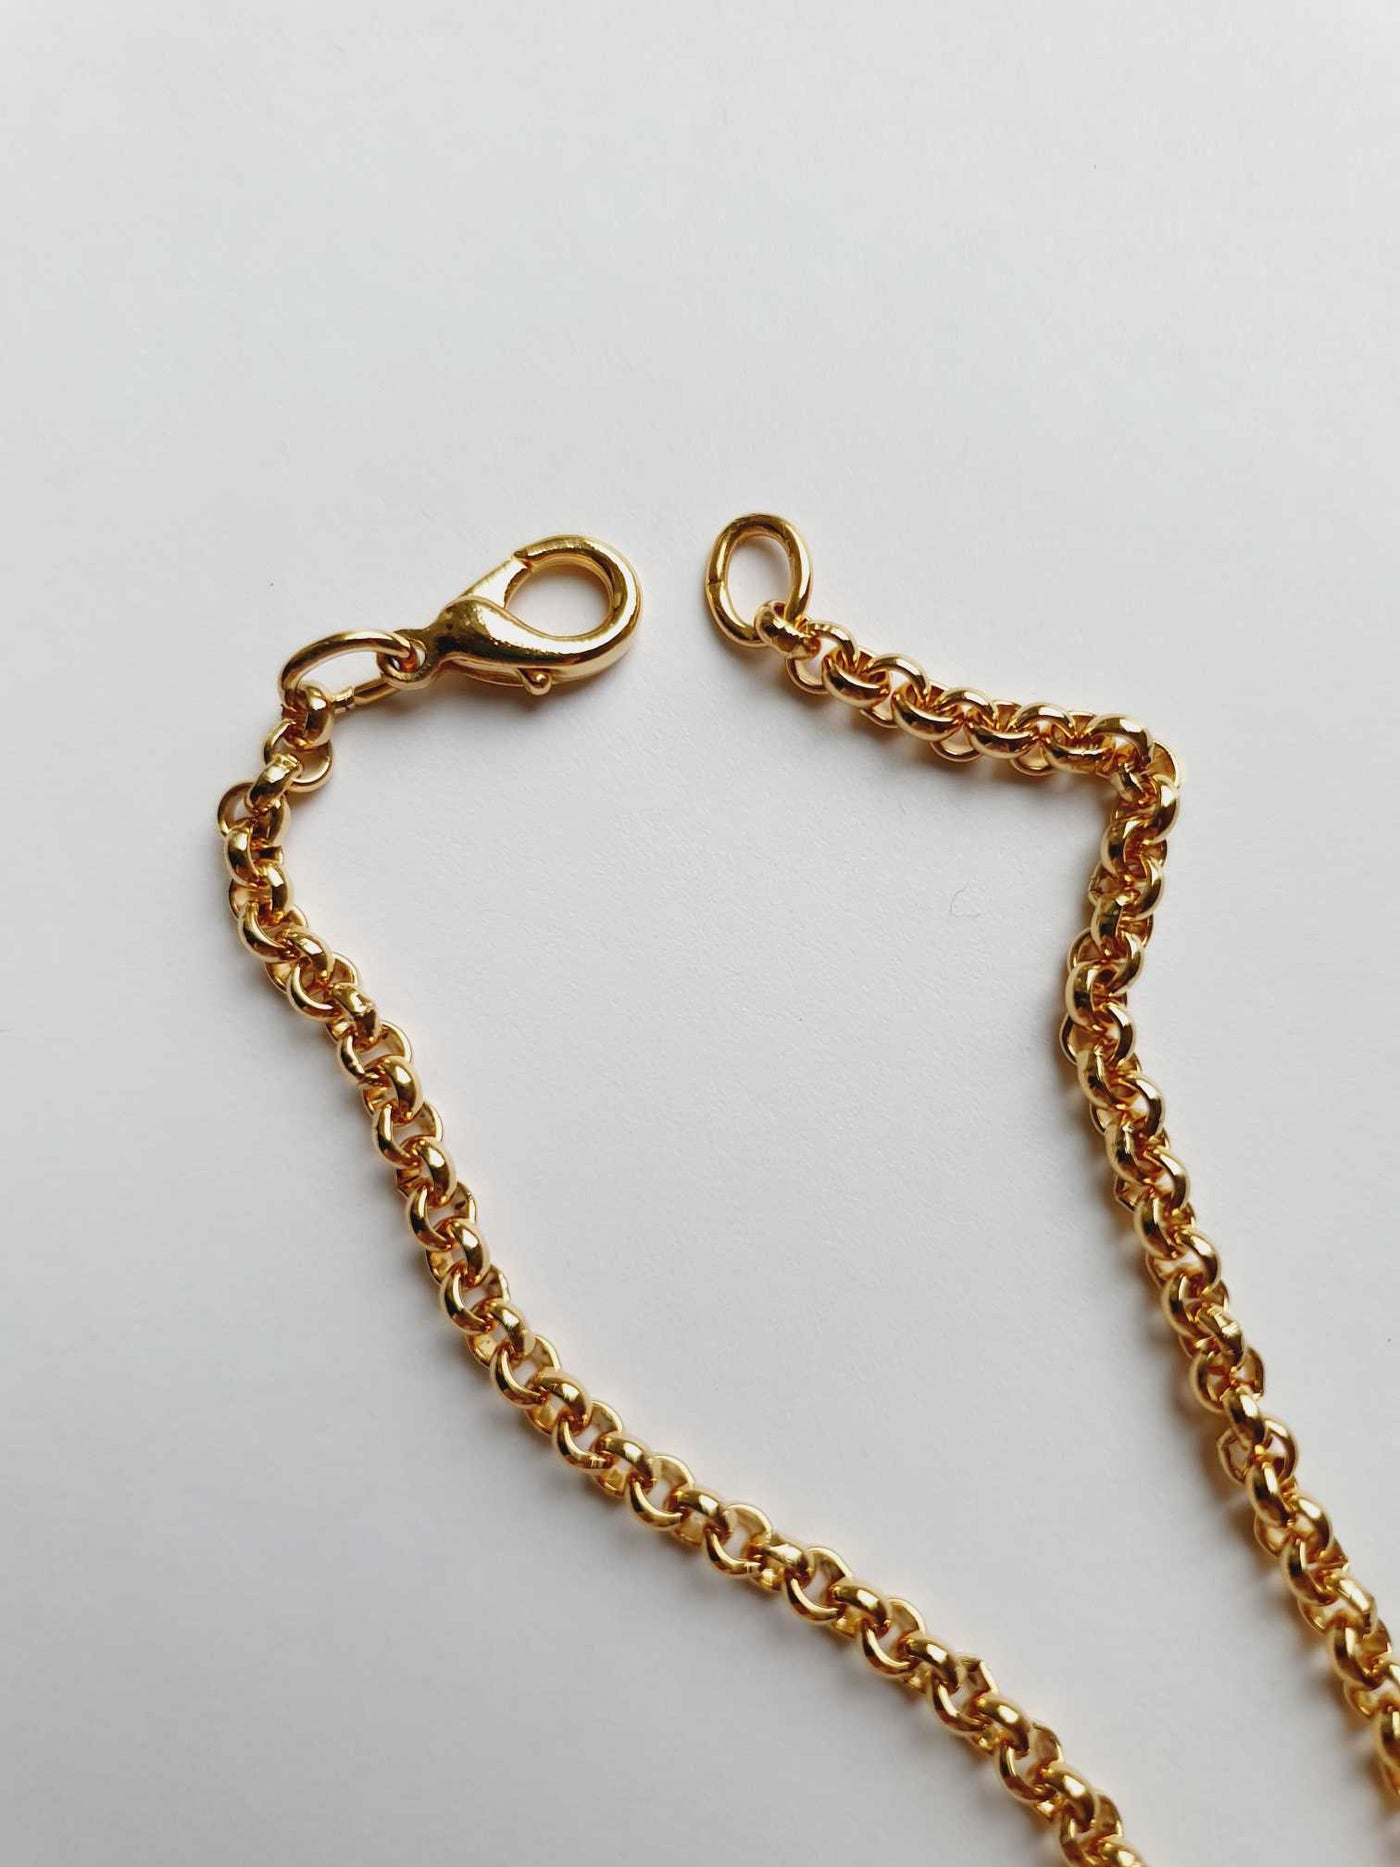 Vintage Gold Plated Rolo Chain Necklace with Heart Padlock Charm